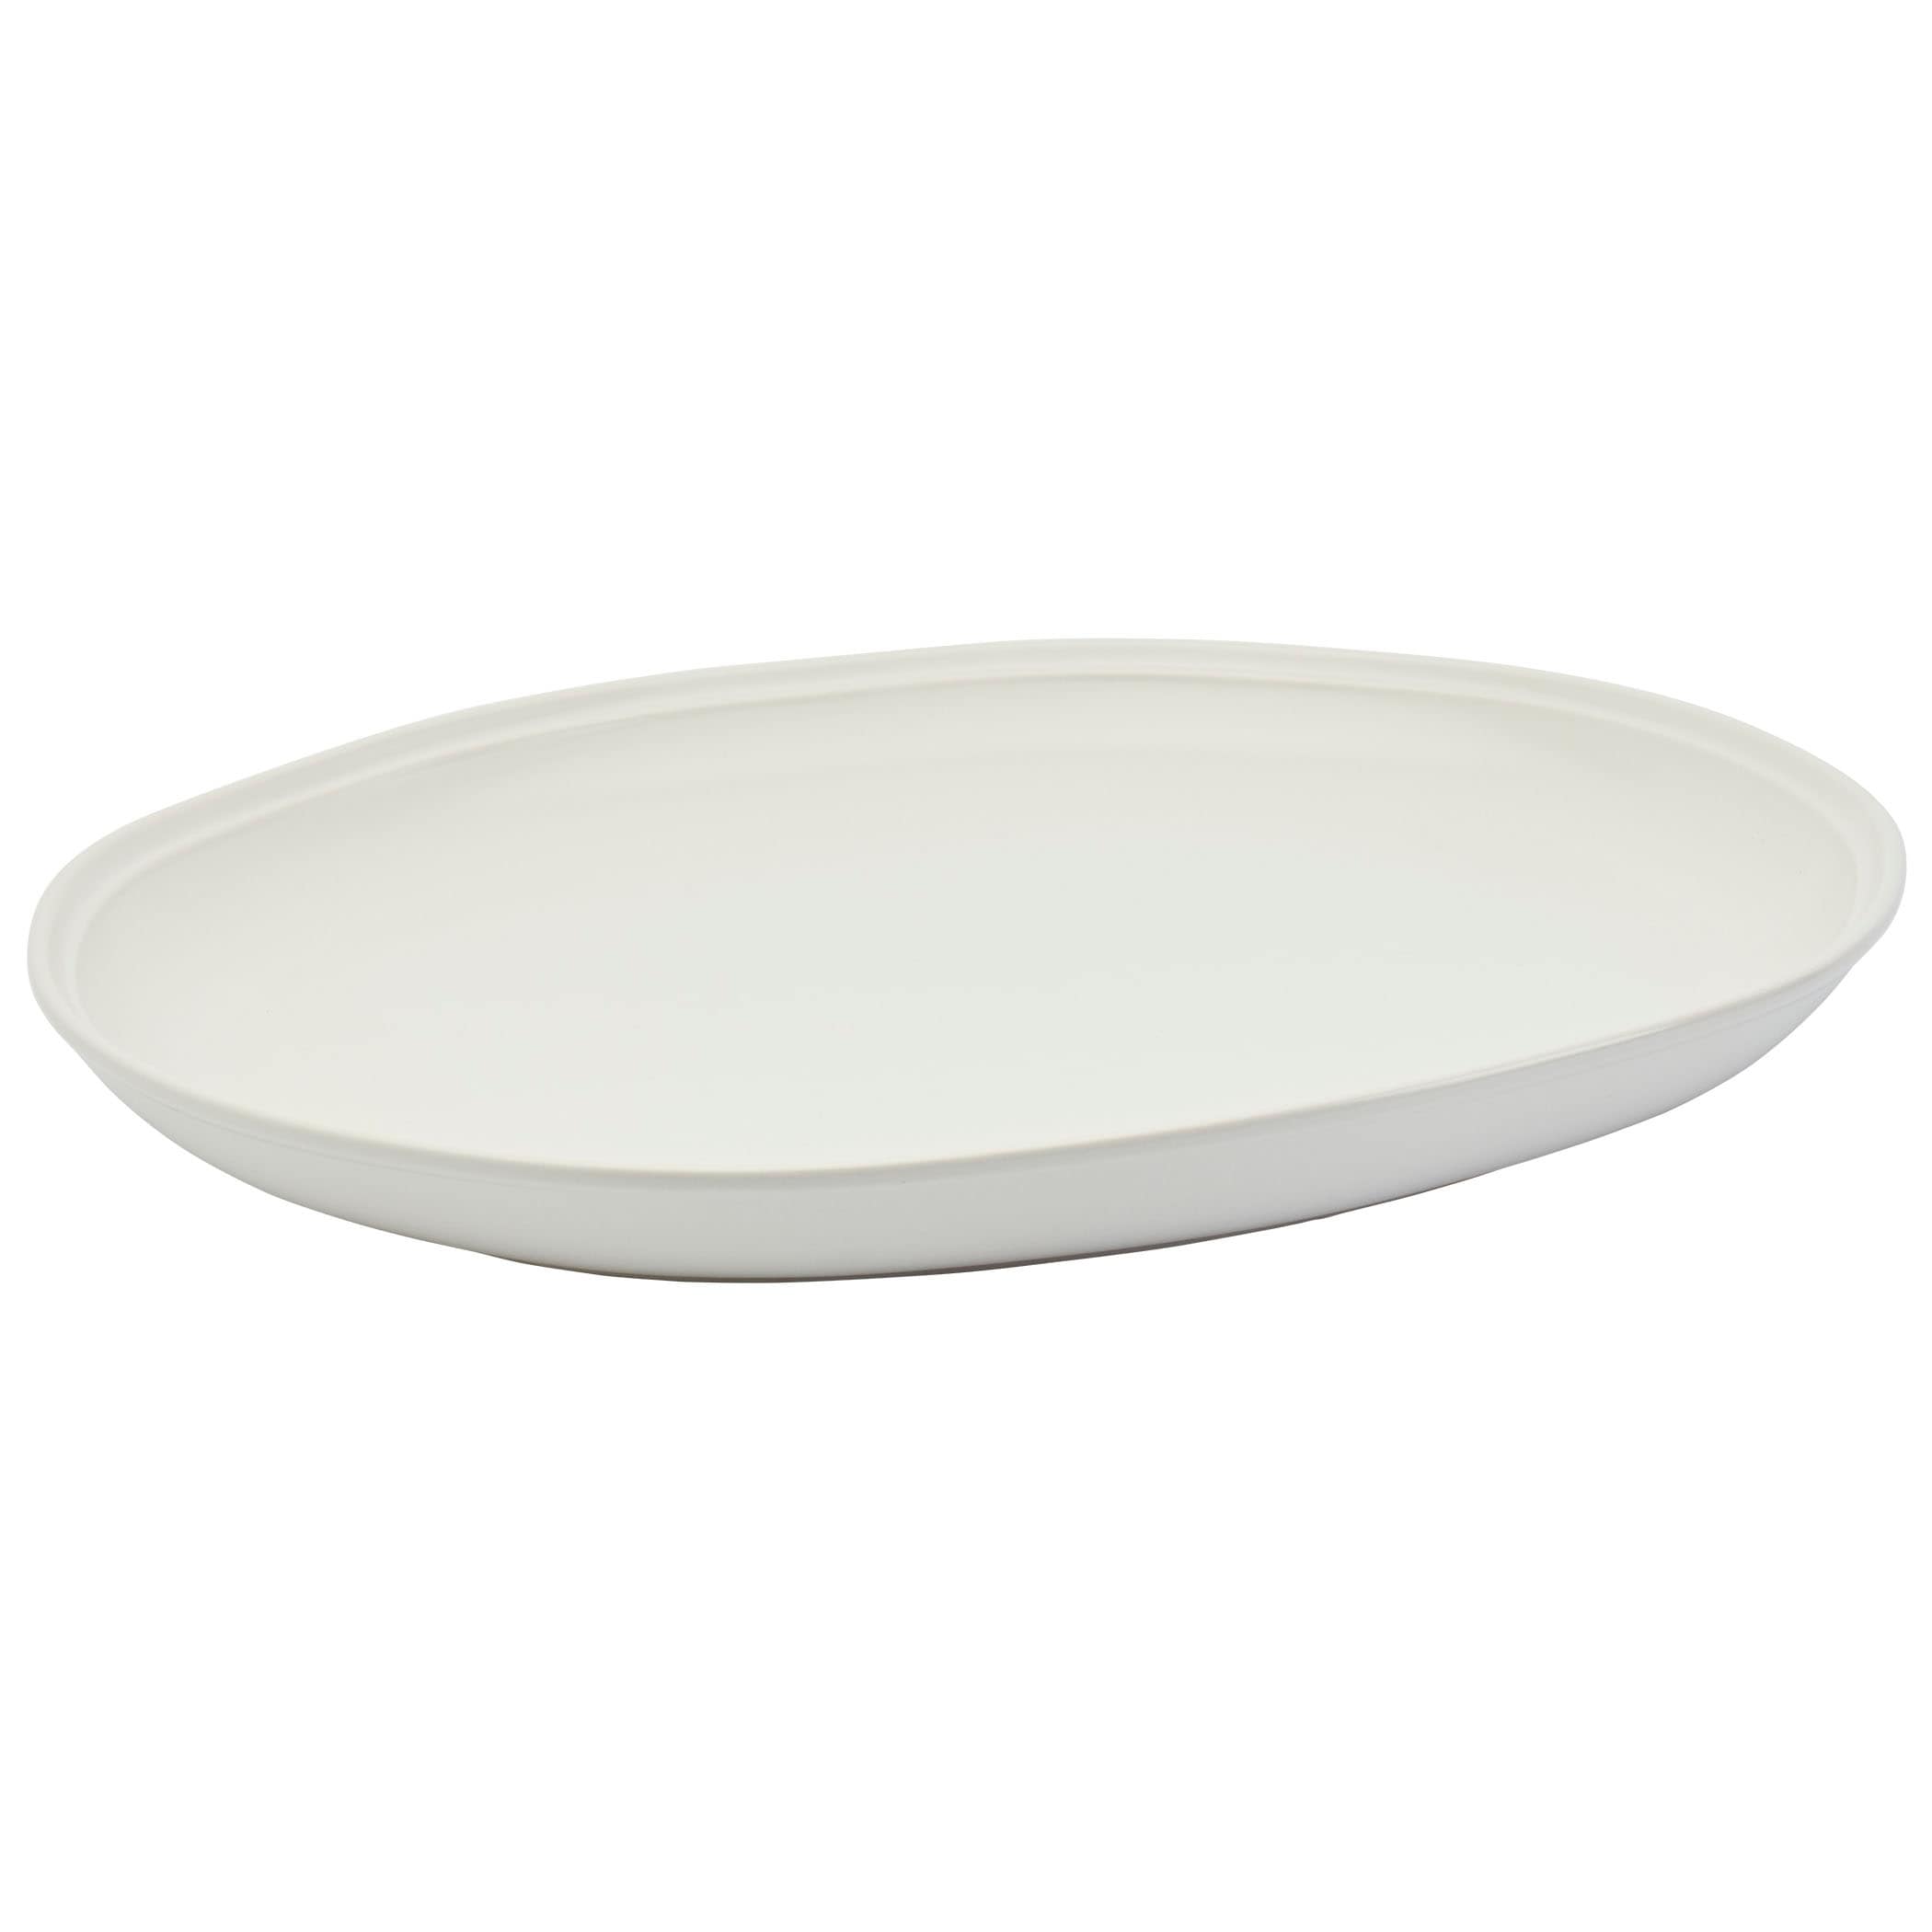 Bee & Willow White Earthenware 18 Oval Platter - 1 Piece